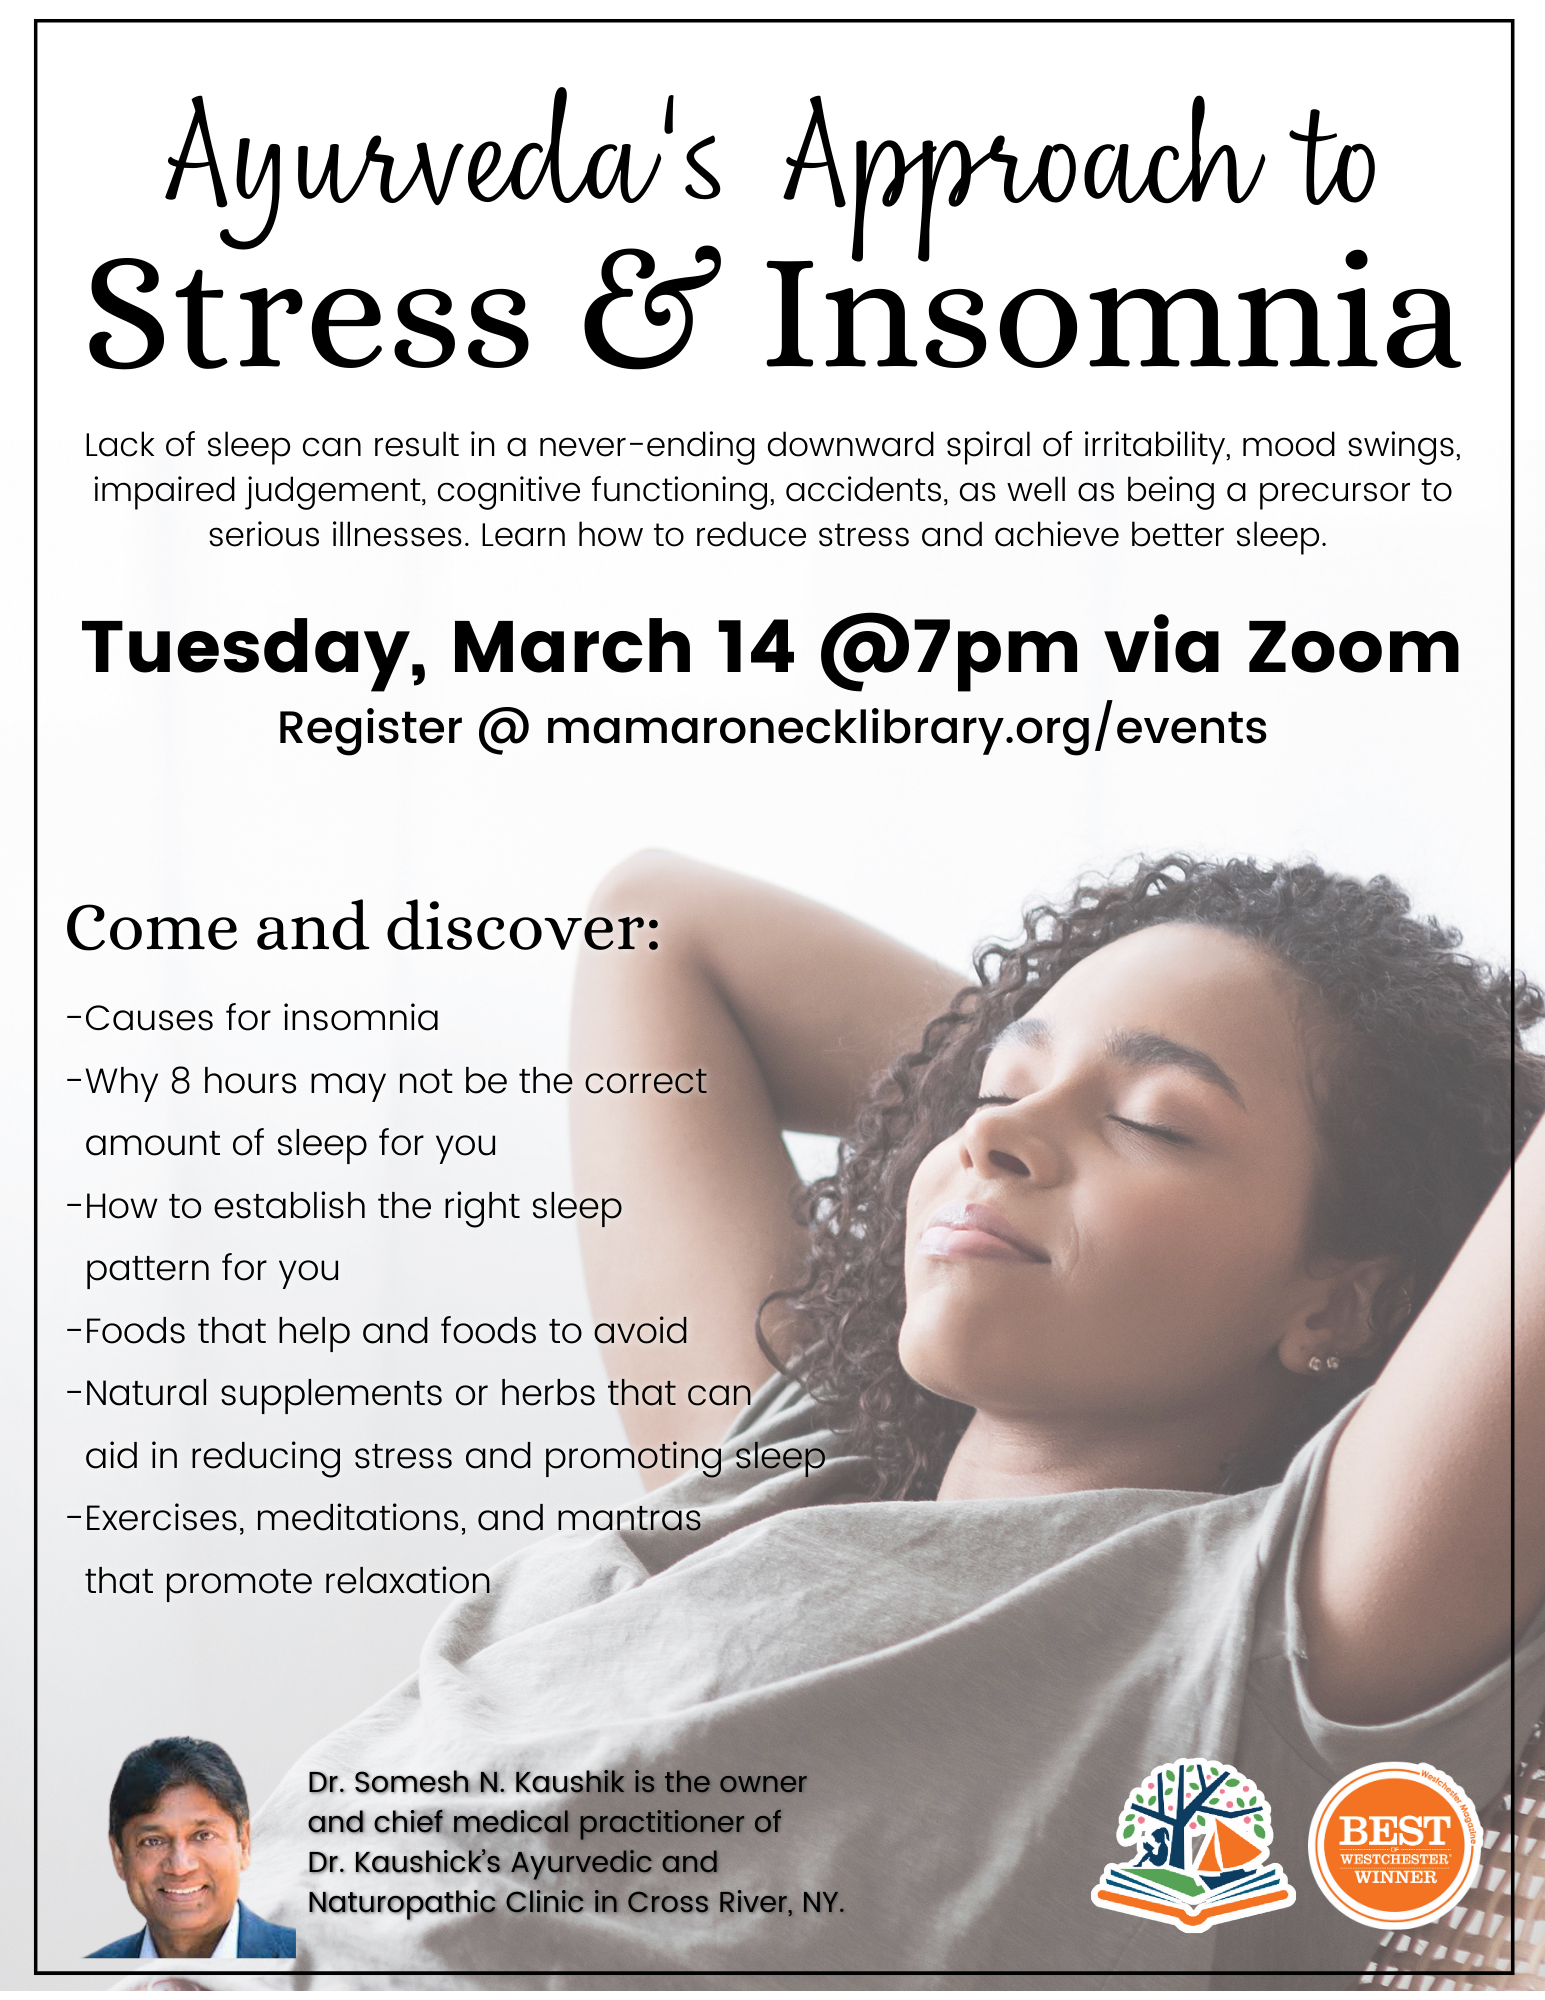 3/14 @ 7pm via zoom: Ayurveda's approach to stress and insomnia